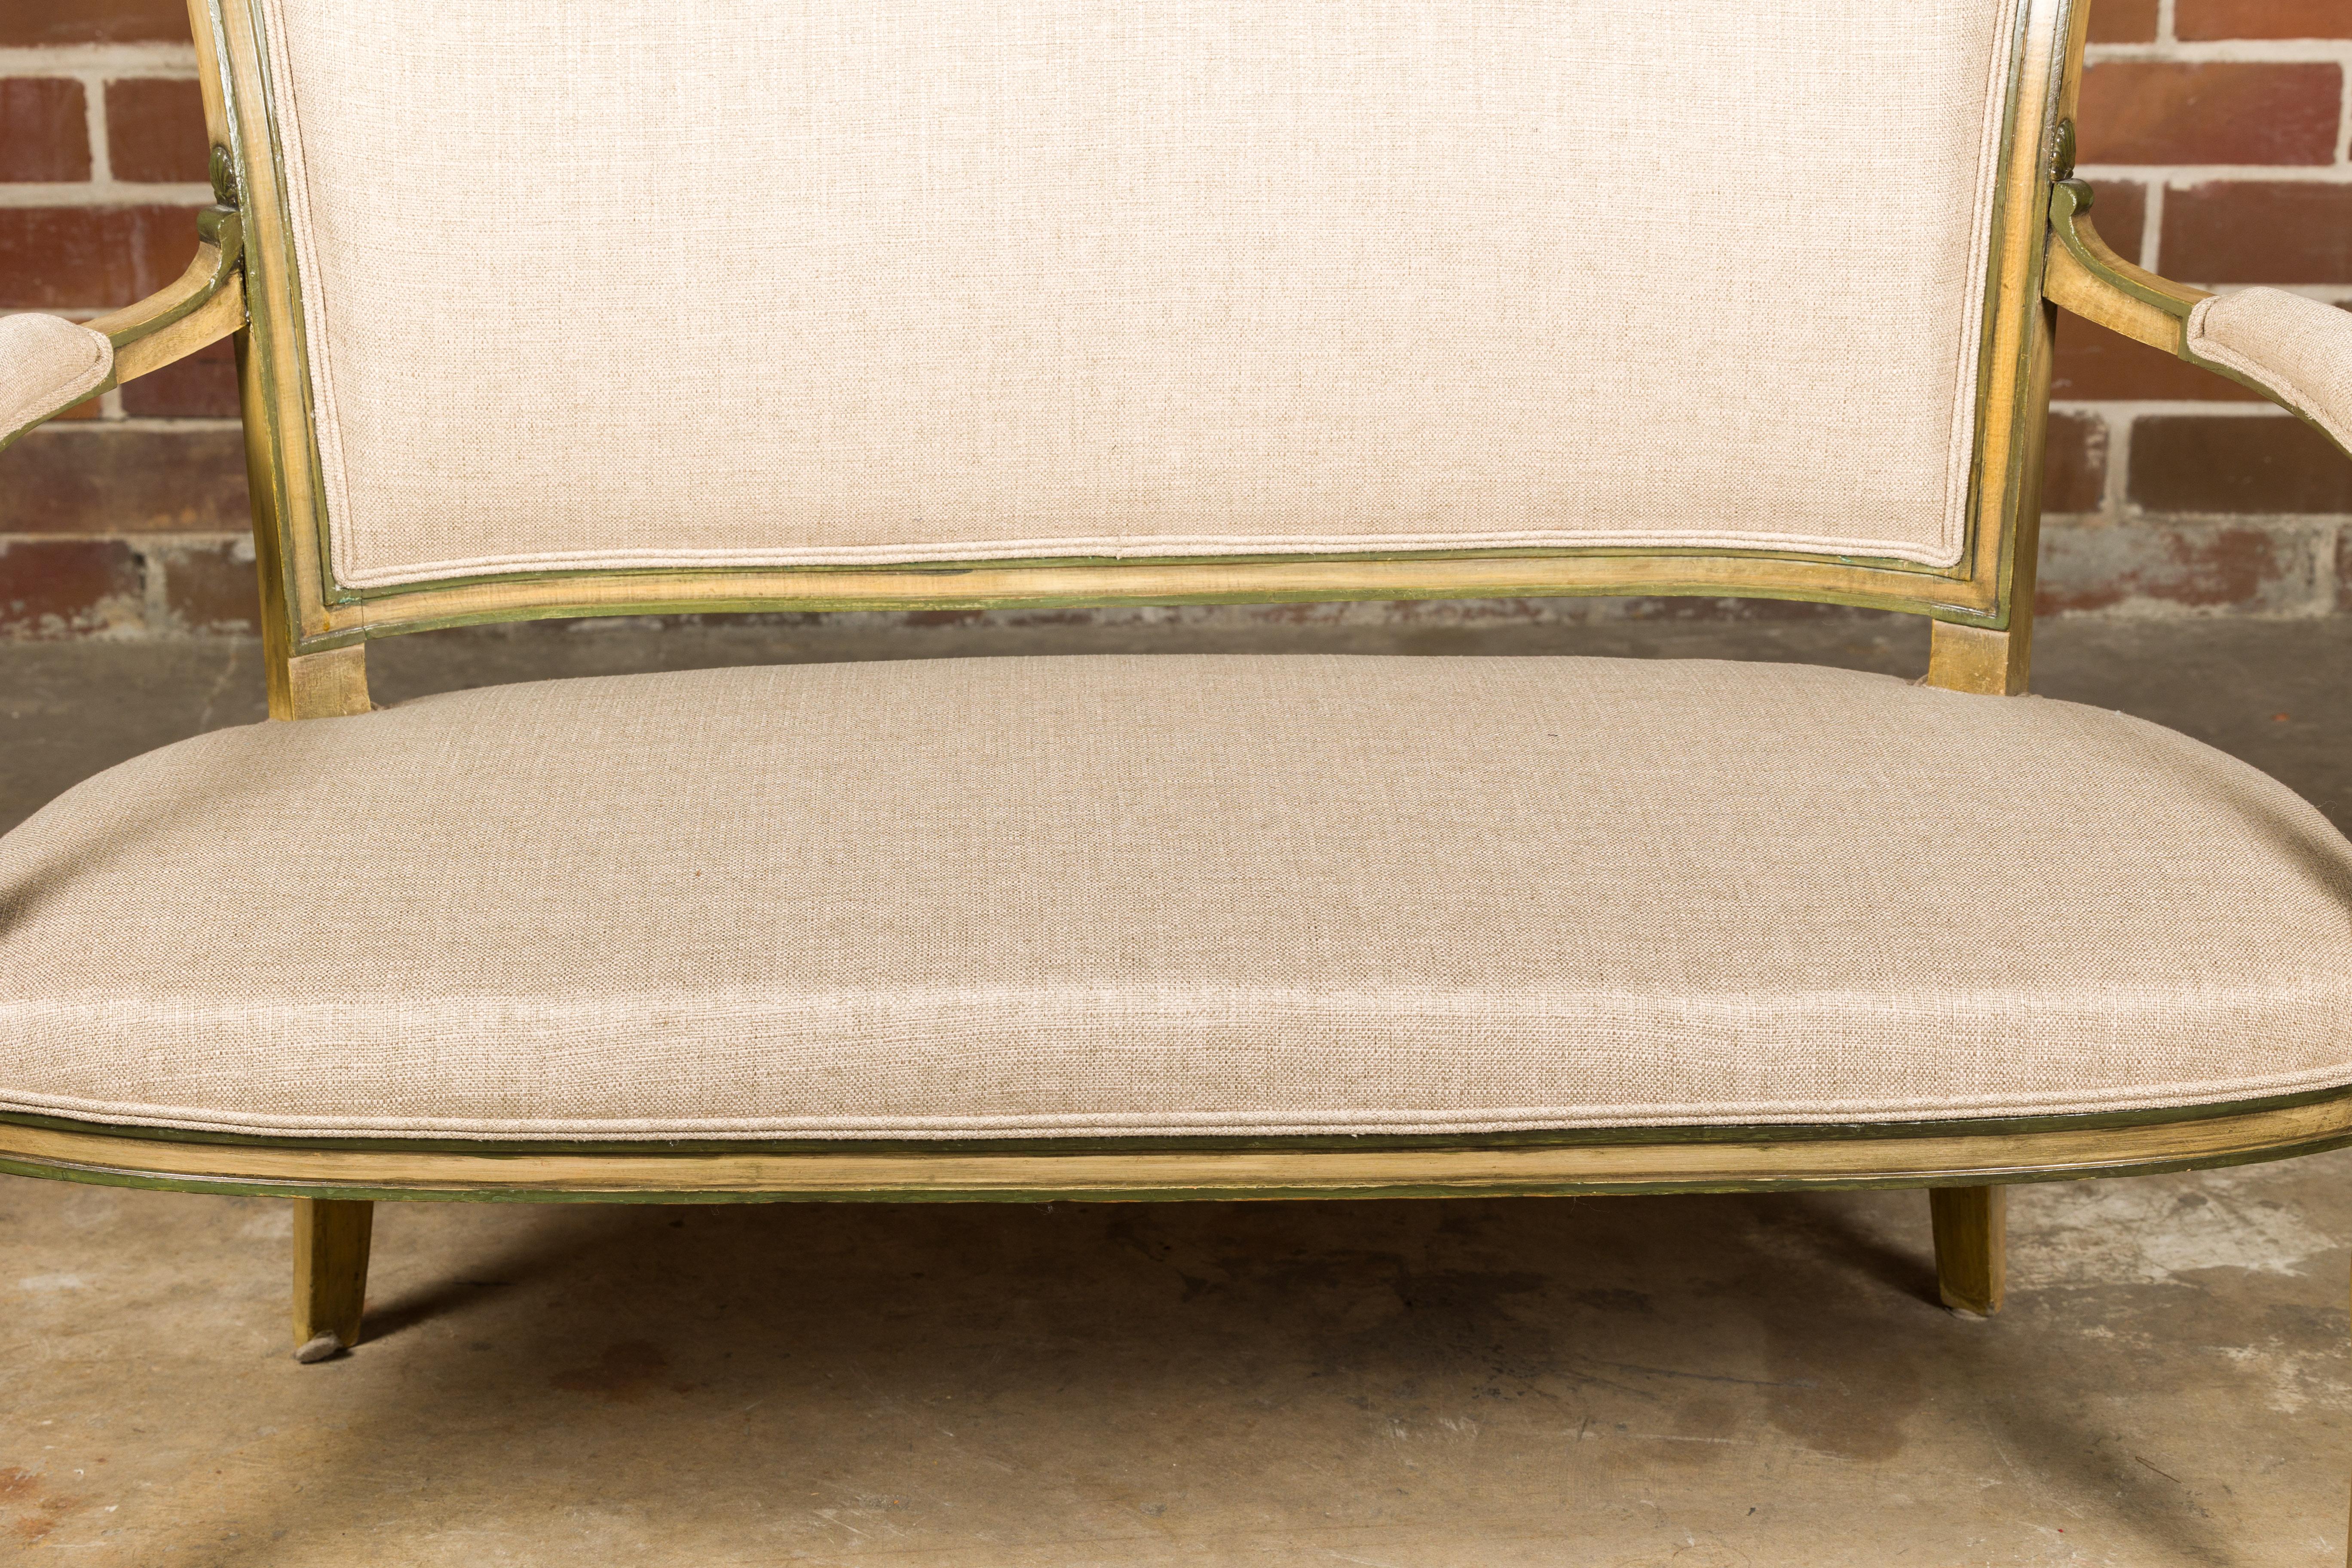 French Directoire Settee with Painted Garlands, Upholstery and Diamond Motifs For Sale 8